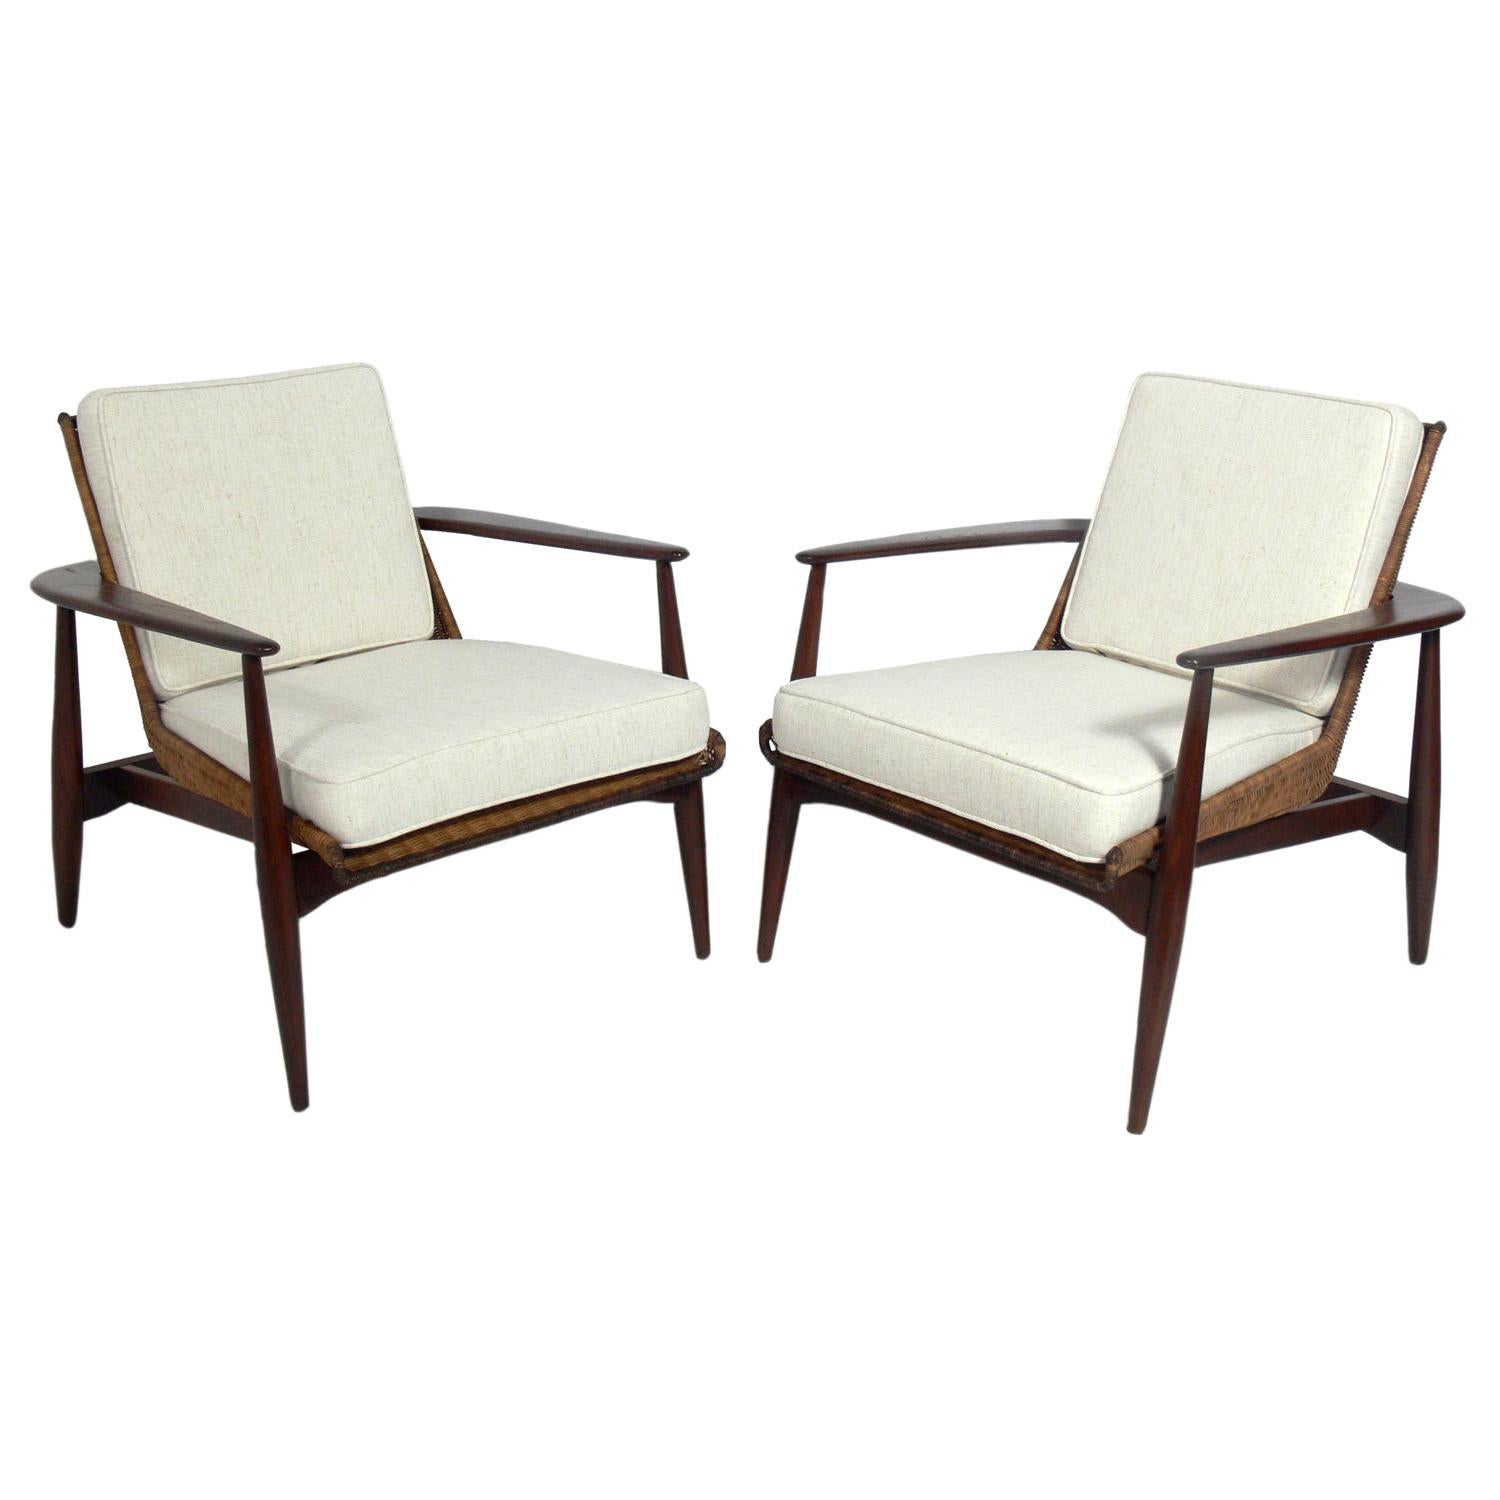 Pair of Lawrence Peabody Walnut and Rattan Lounge Chairs